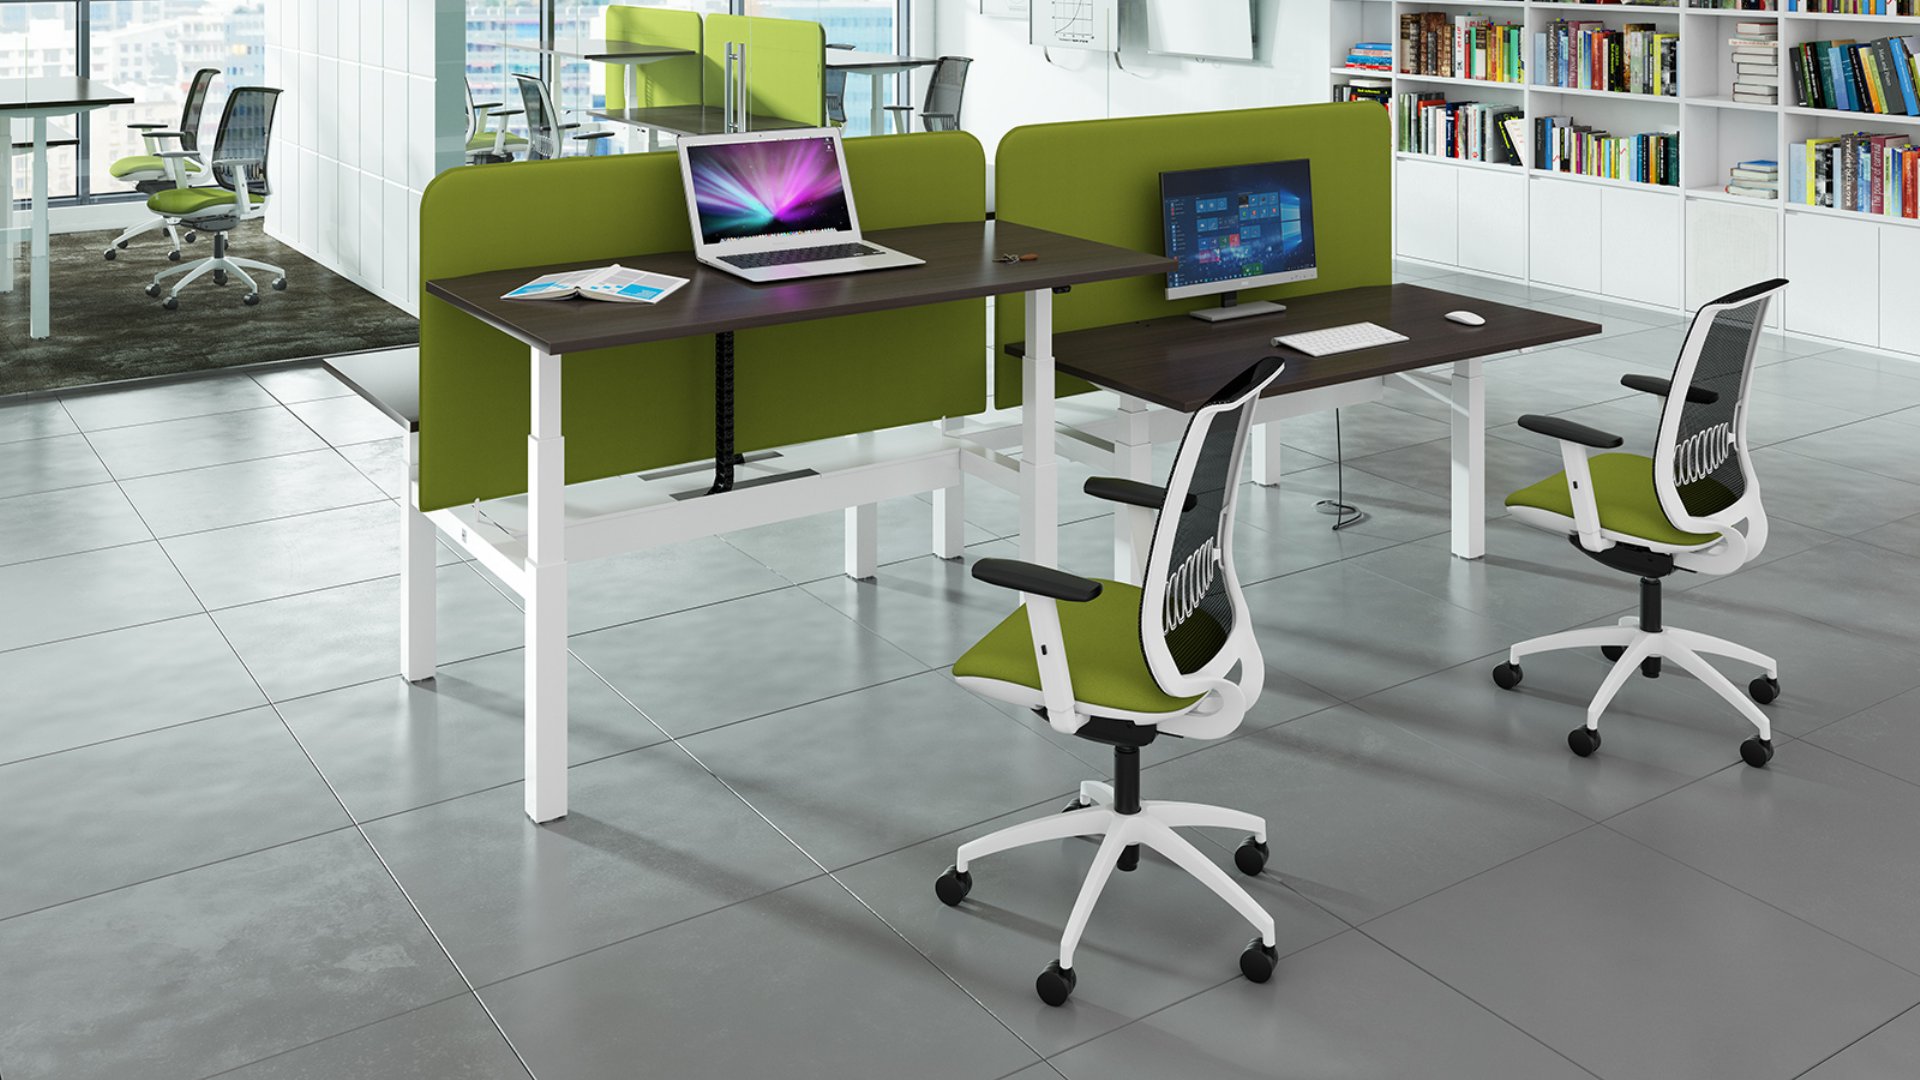 Ergonomic Office Furniture - A boost to your health?